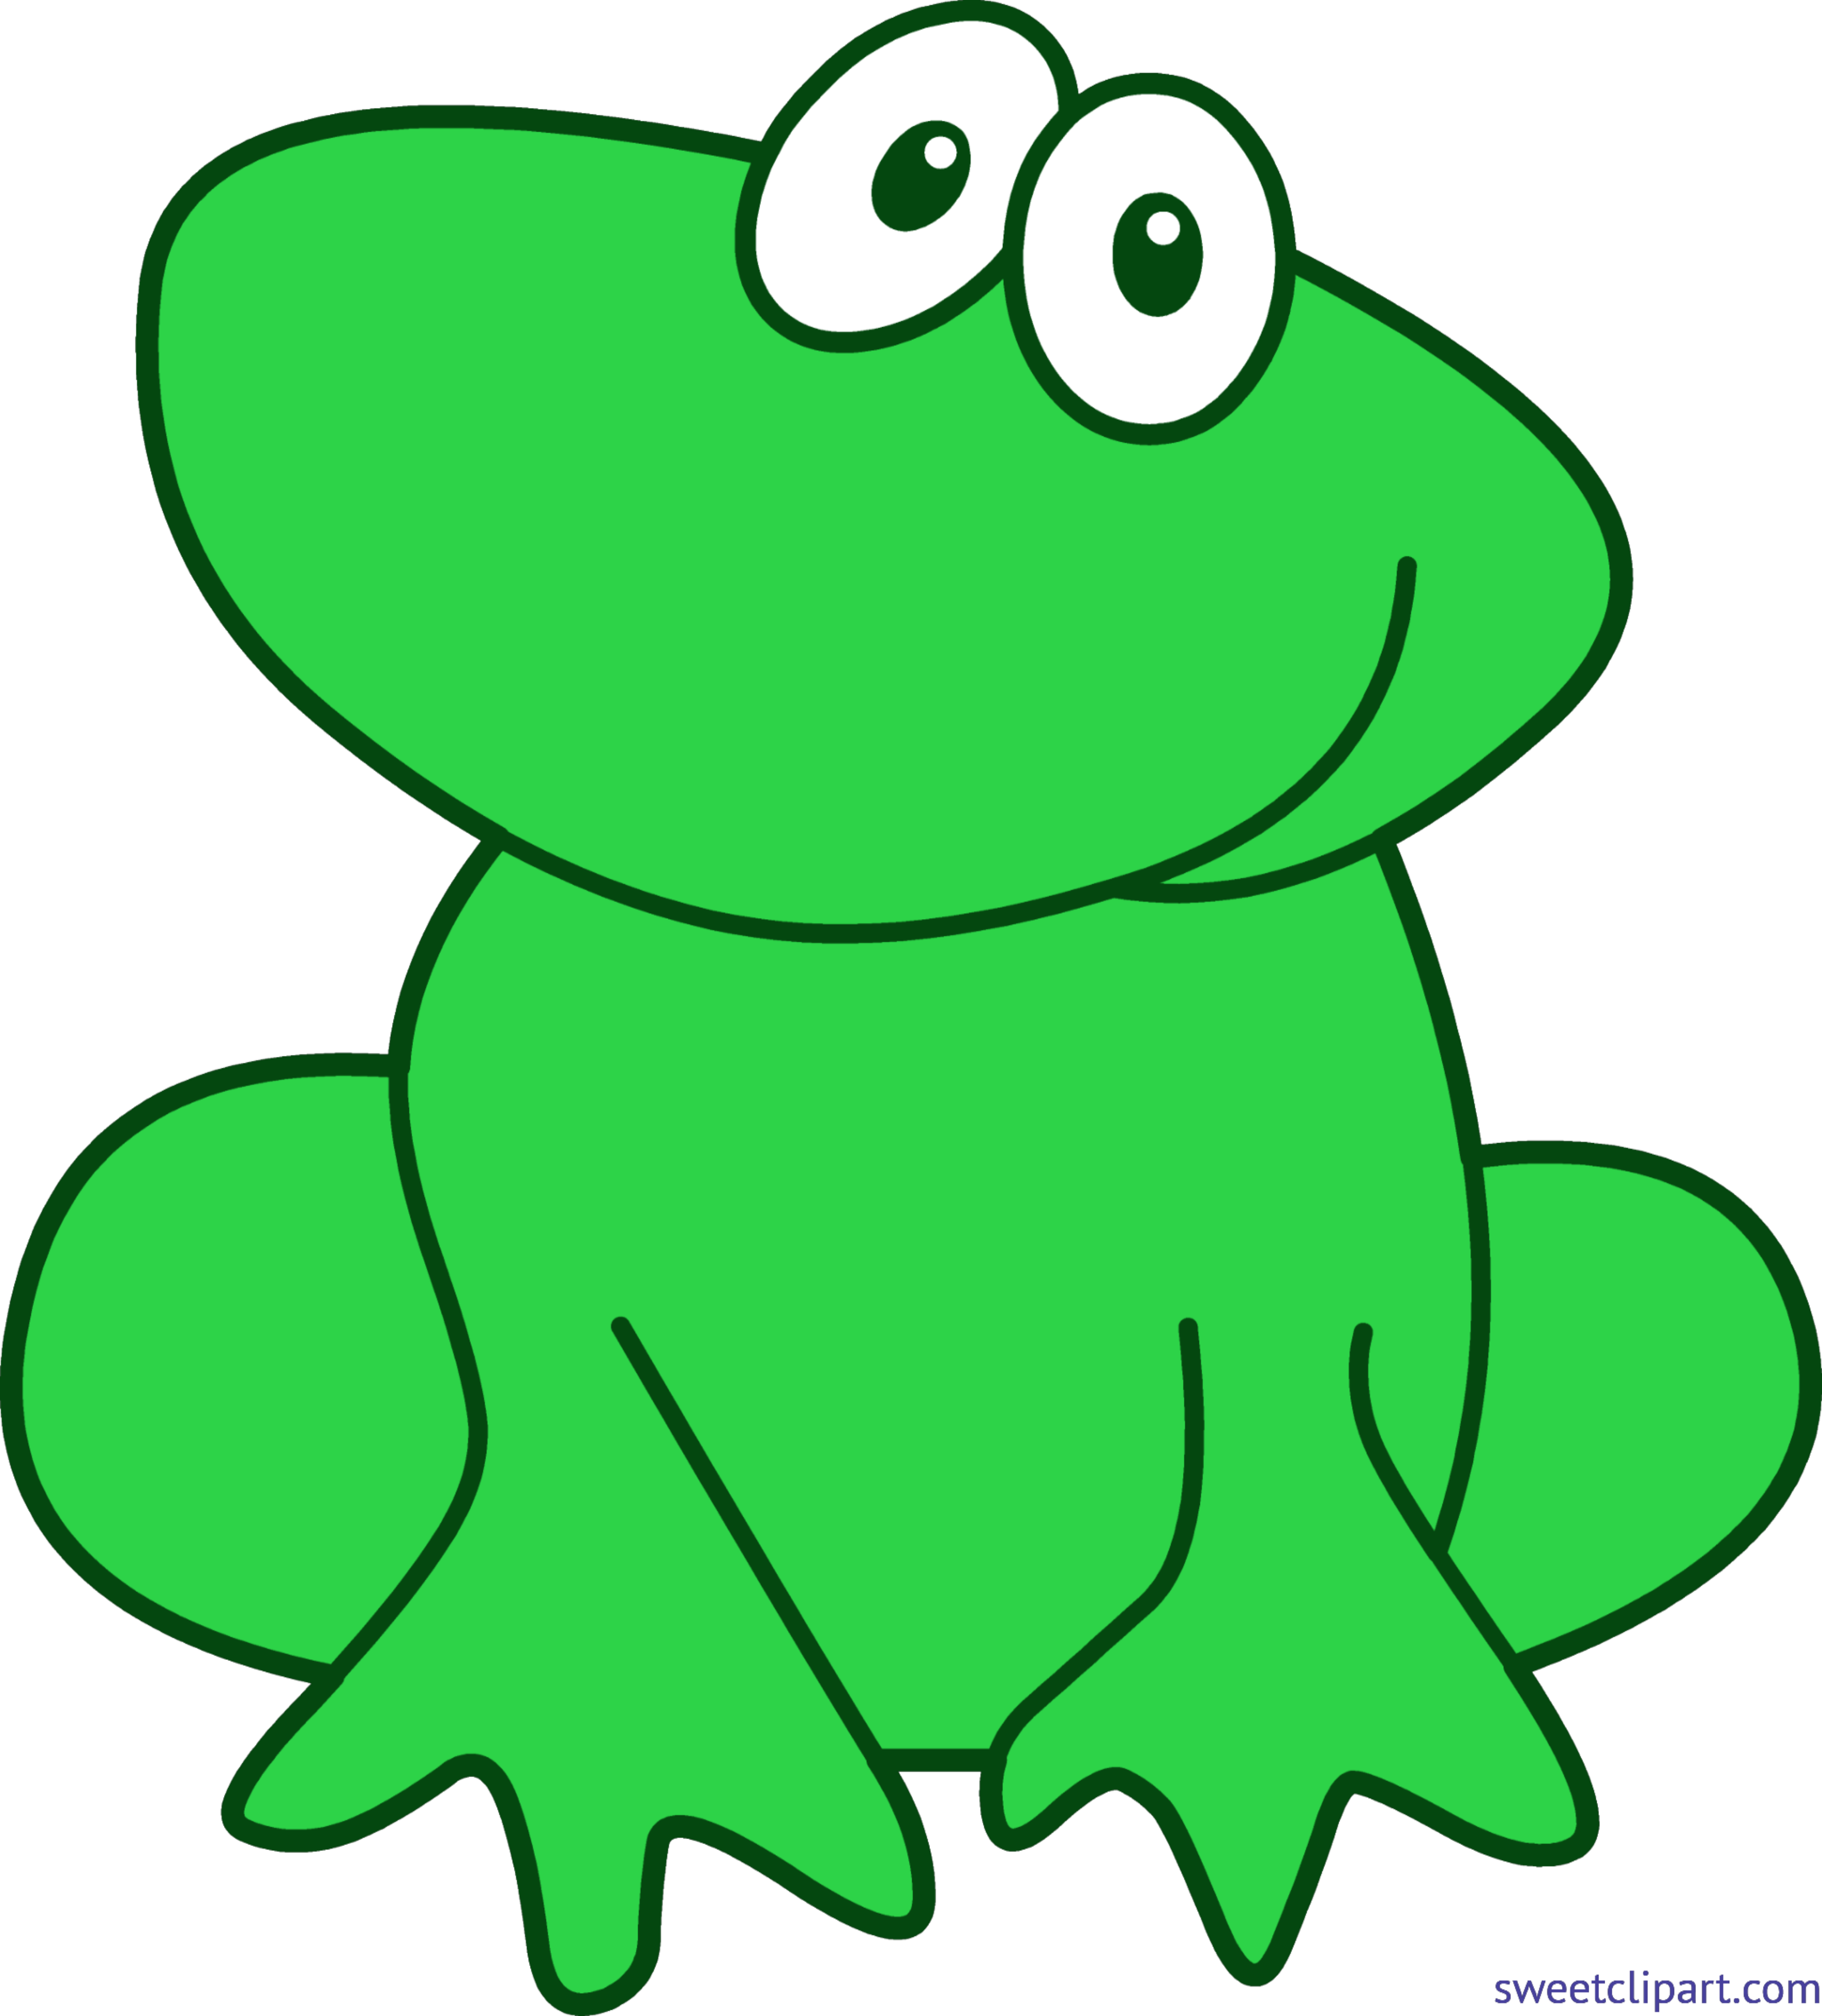 Frogs clipart easy. Frog green clip art